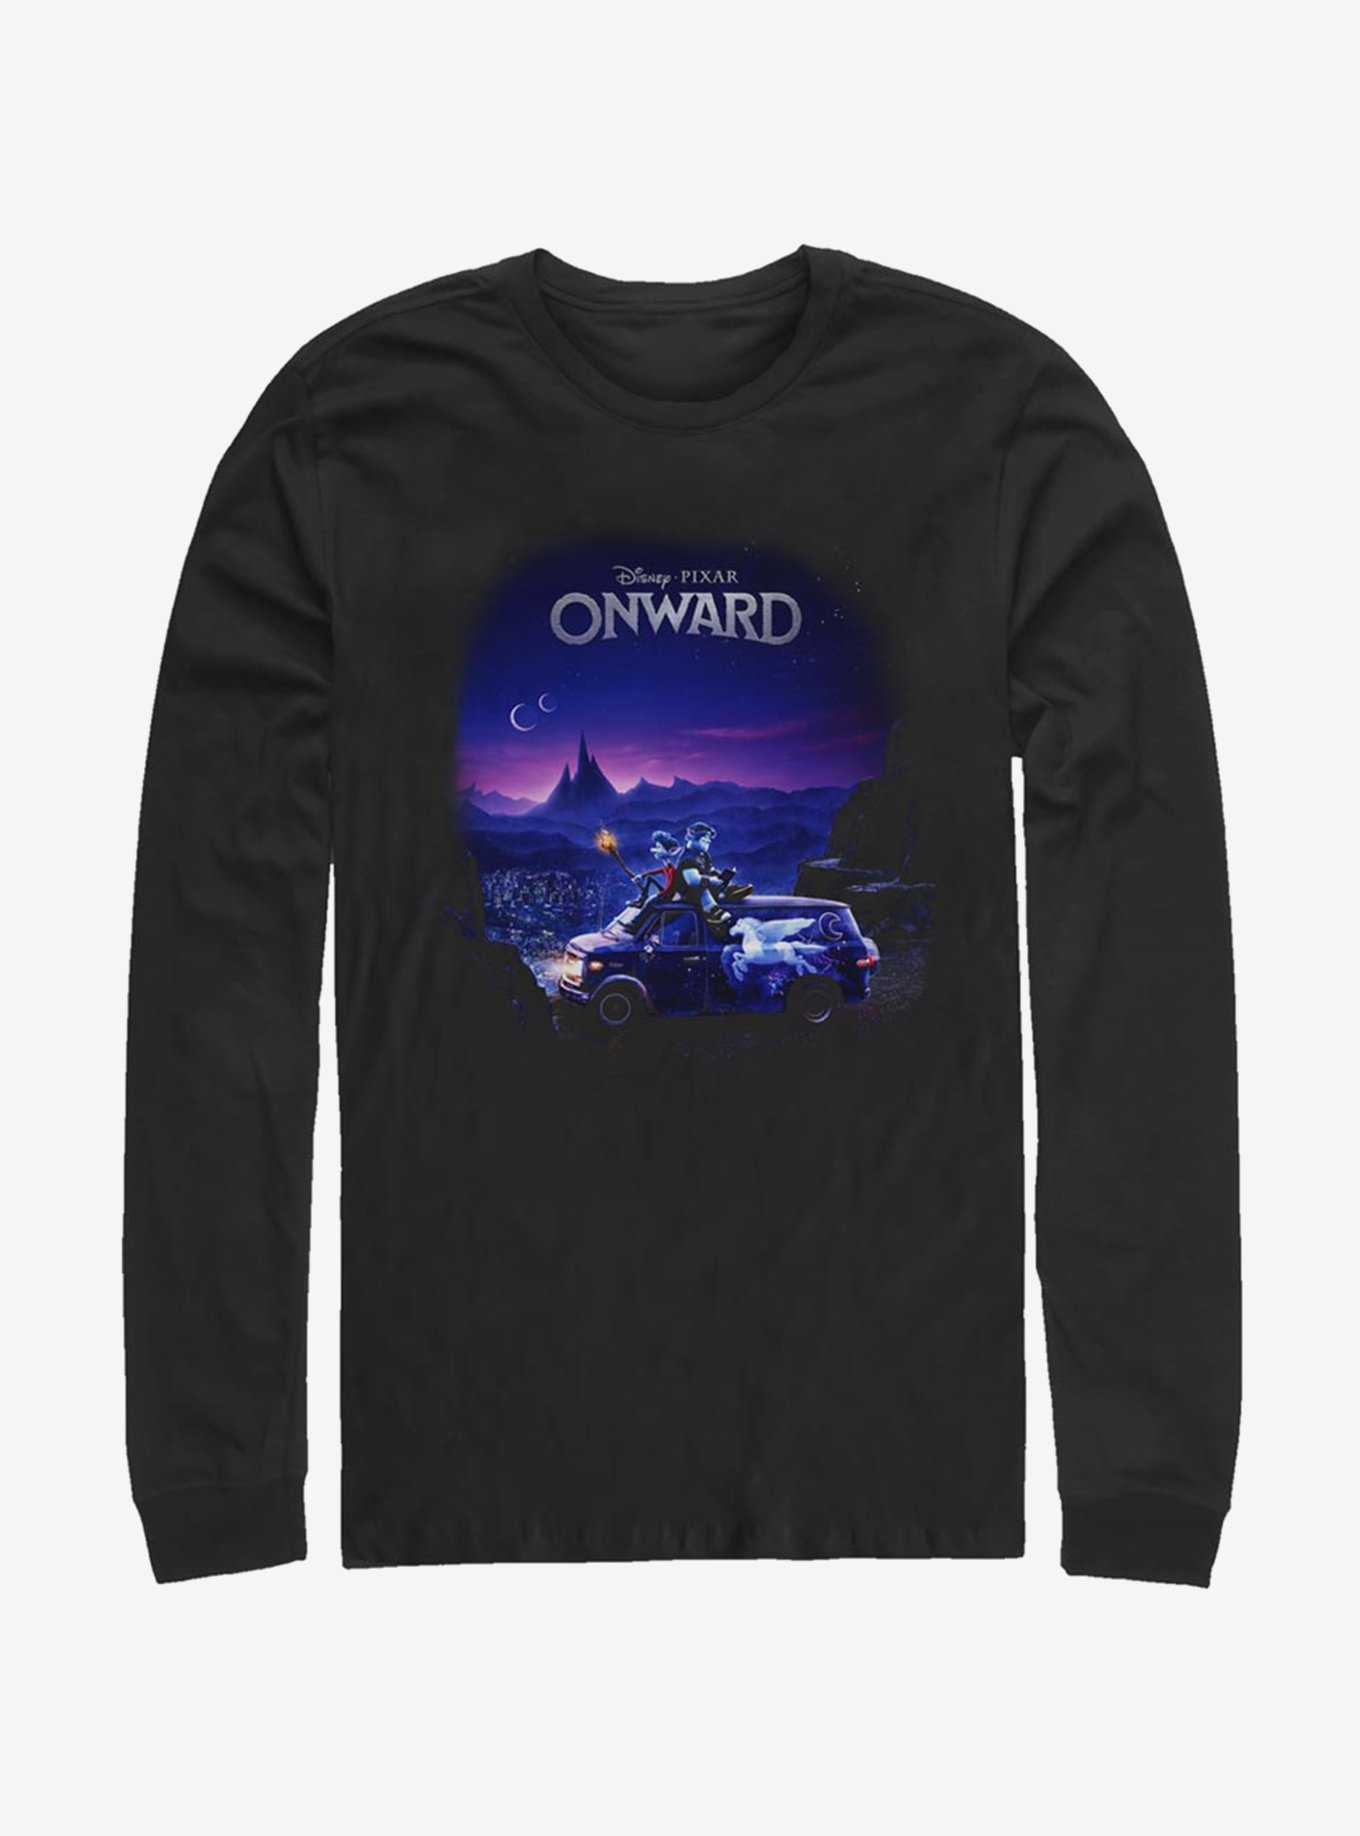 OFFICIAL Onward Merchandise | Movie Hot Topic T-Shirts 